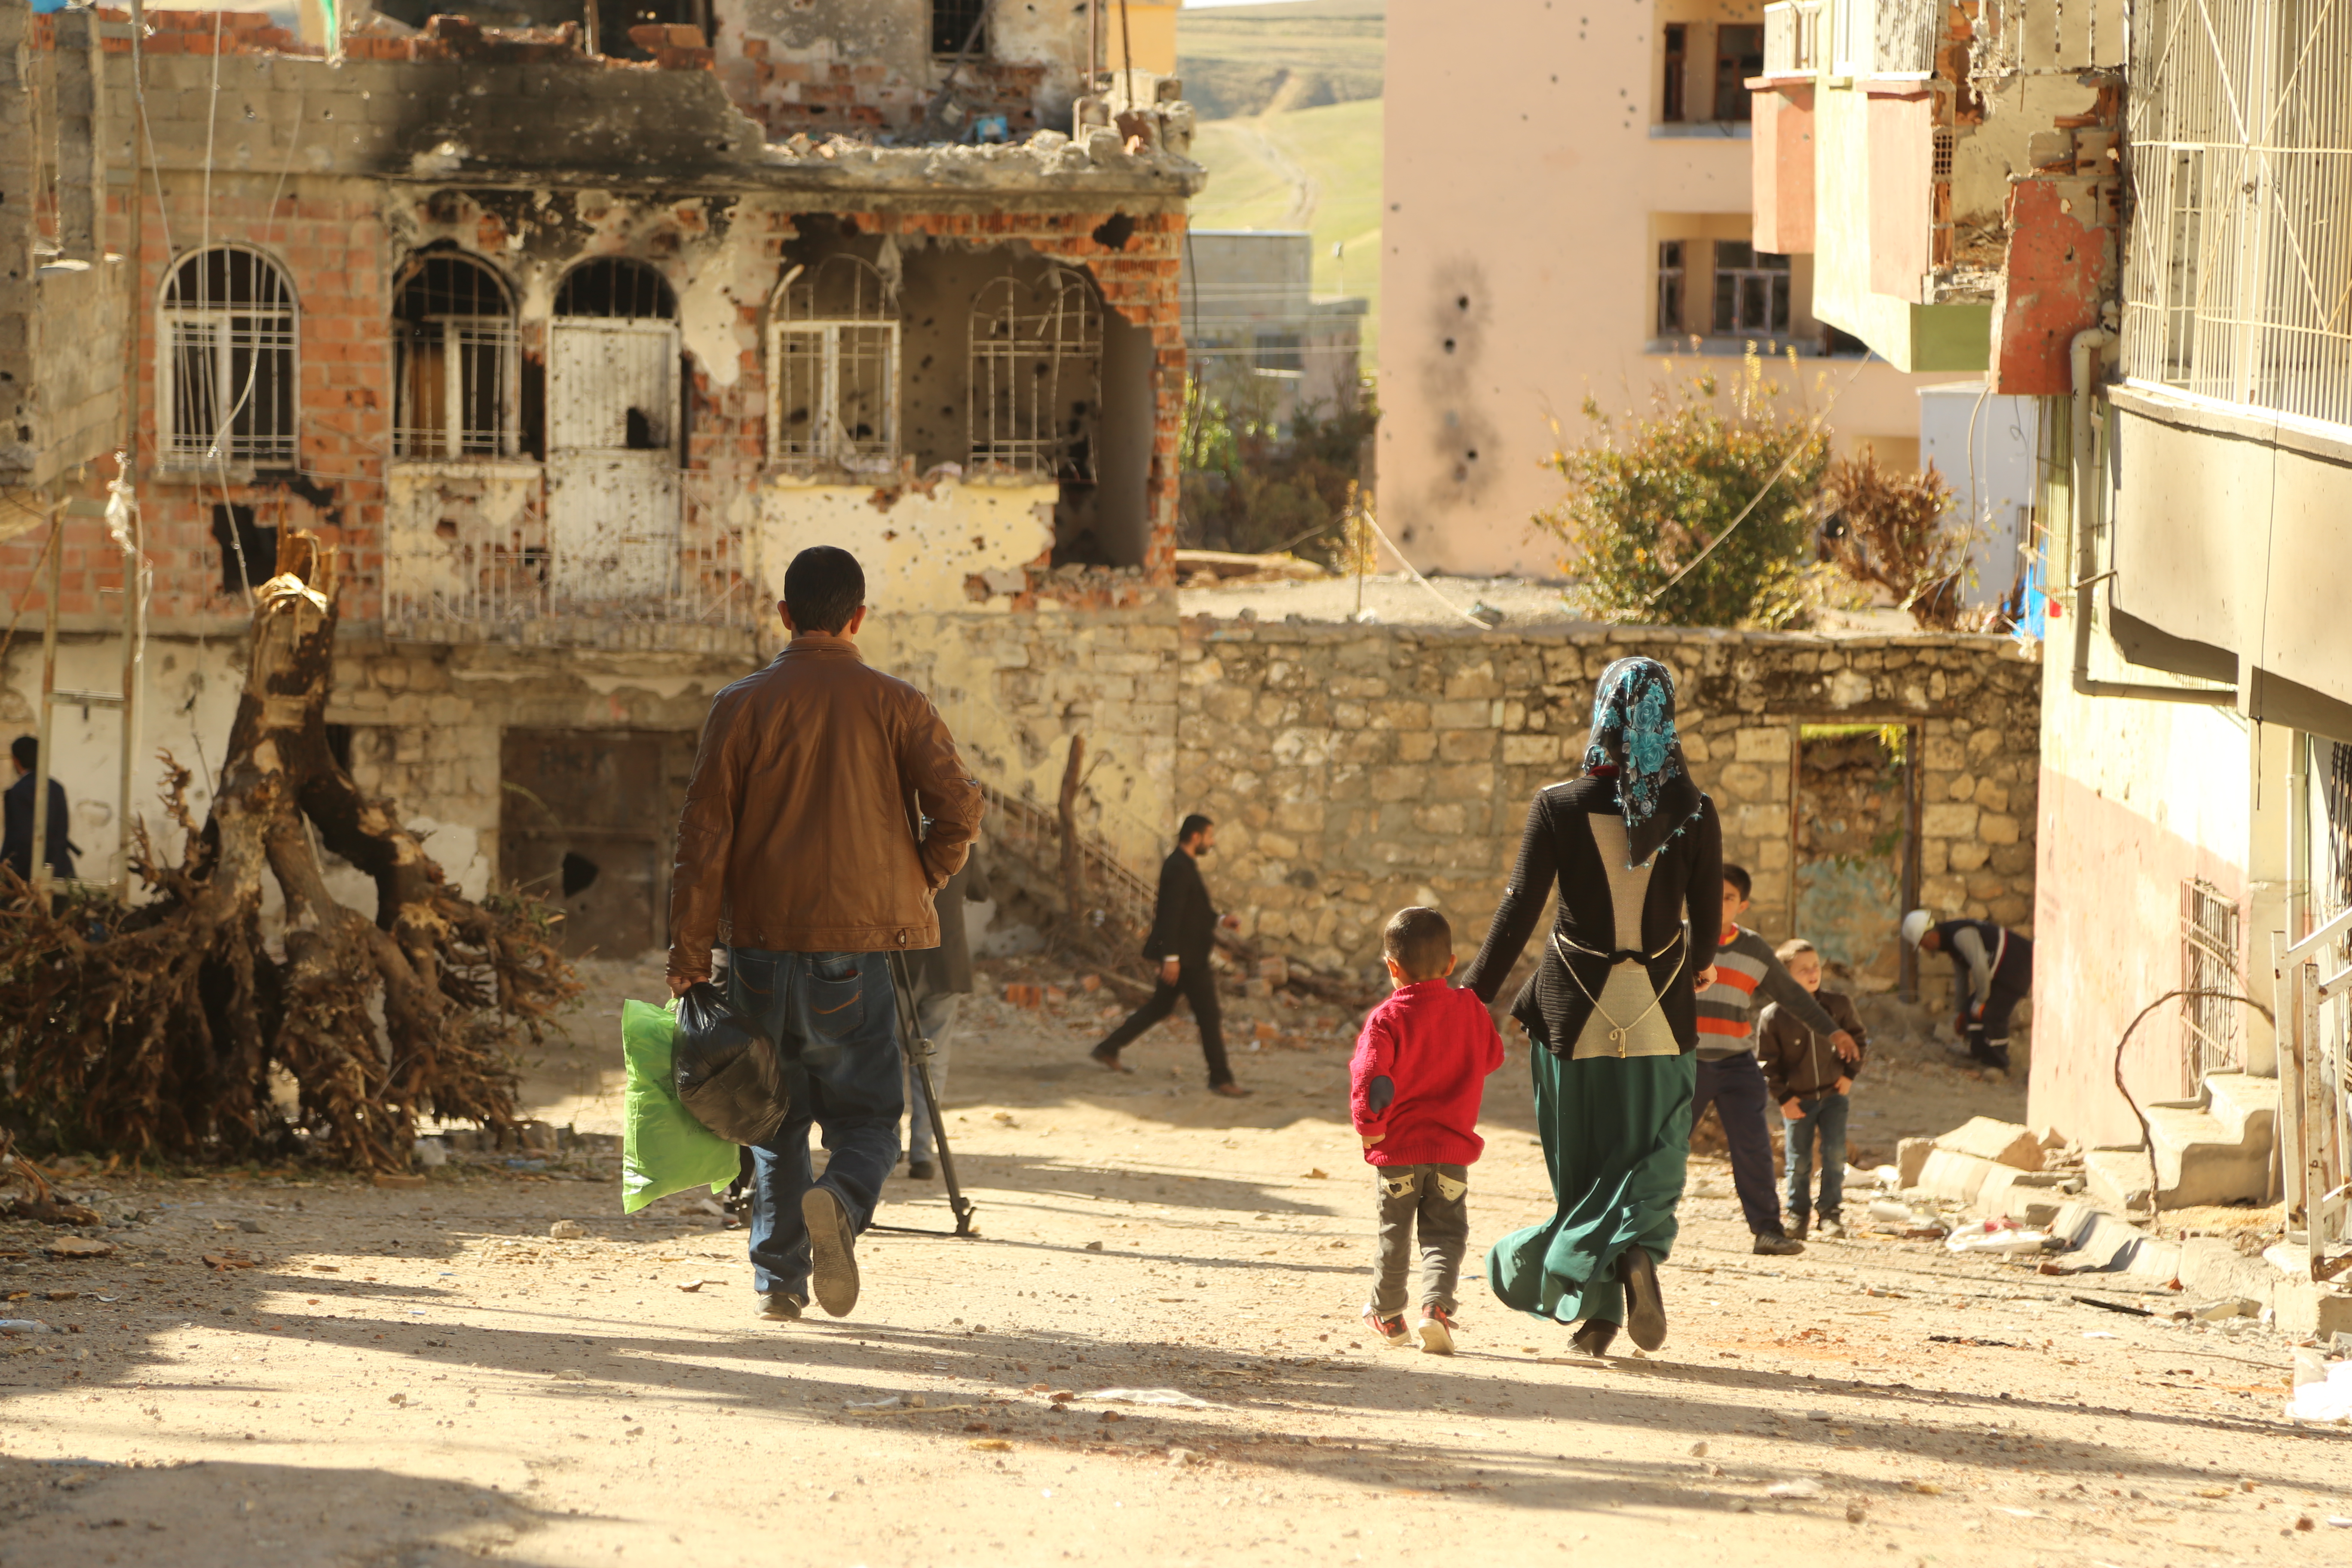 Residents of Farqîn walk amongst the destroyed houses. Picture taken by a friend from Farqîn.